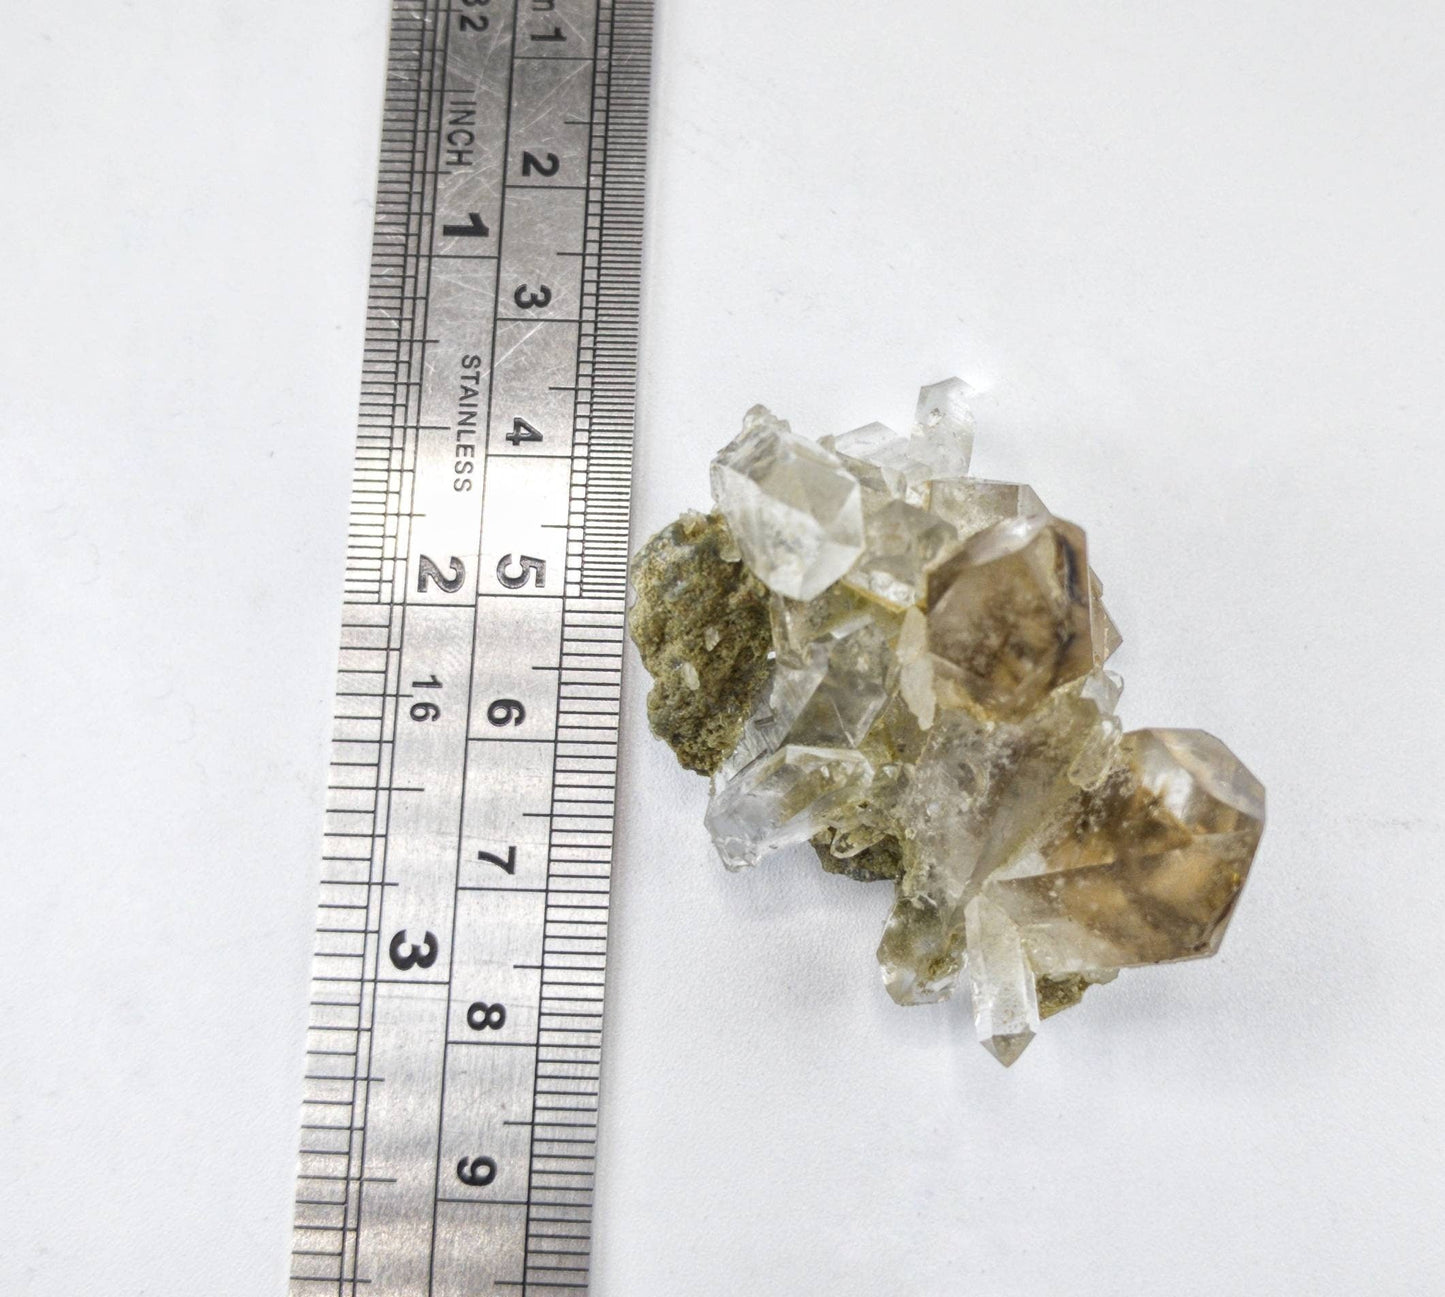 ARSAA GEMS AND MINERALSRutile and Brookite  included quartz cluster with chlorite inclusions.  from Kharan, Baluchistan, Pakistan, 30.5 grams - Premium  from ARSAA GEMS AND MINERALS - Just $200.00! Shop now at ARSAA GEMS AND MINERALS